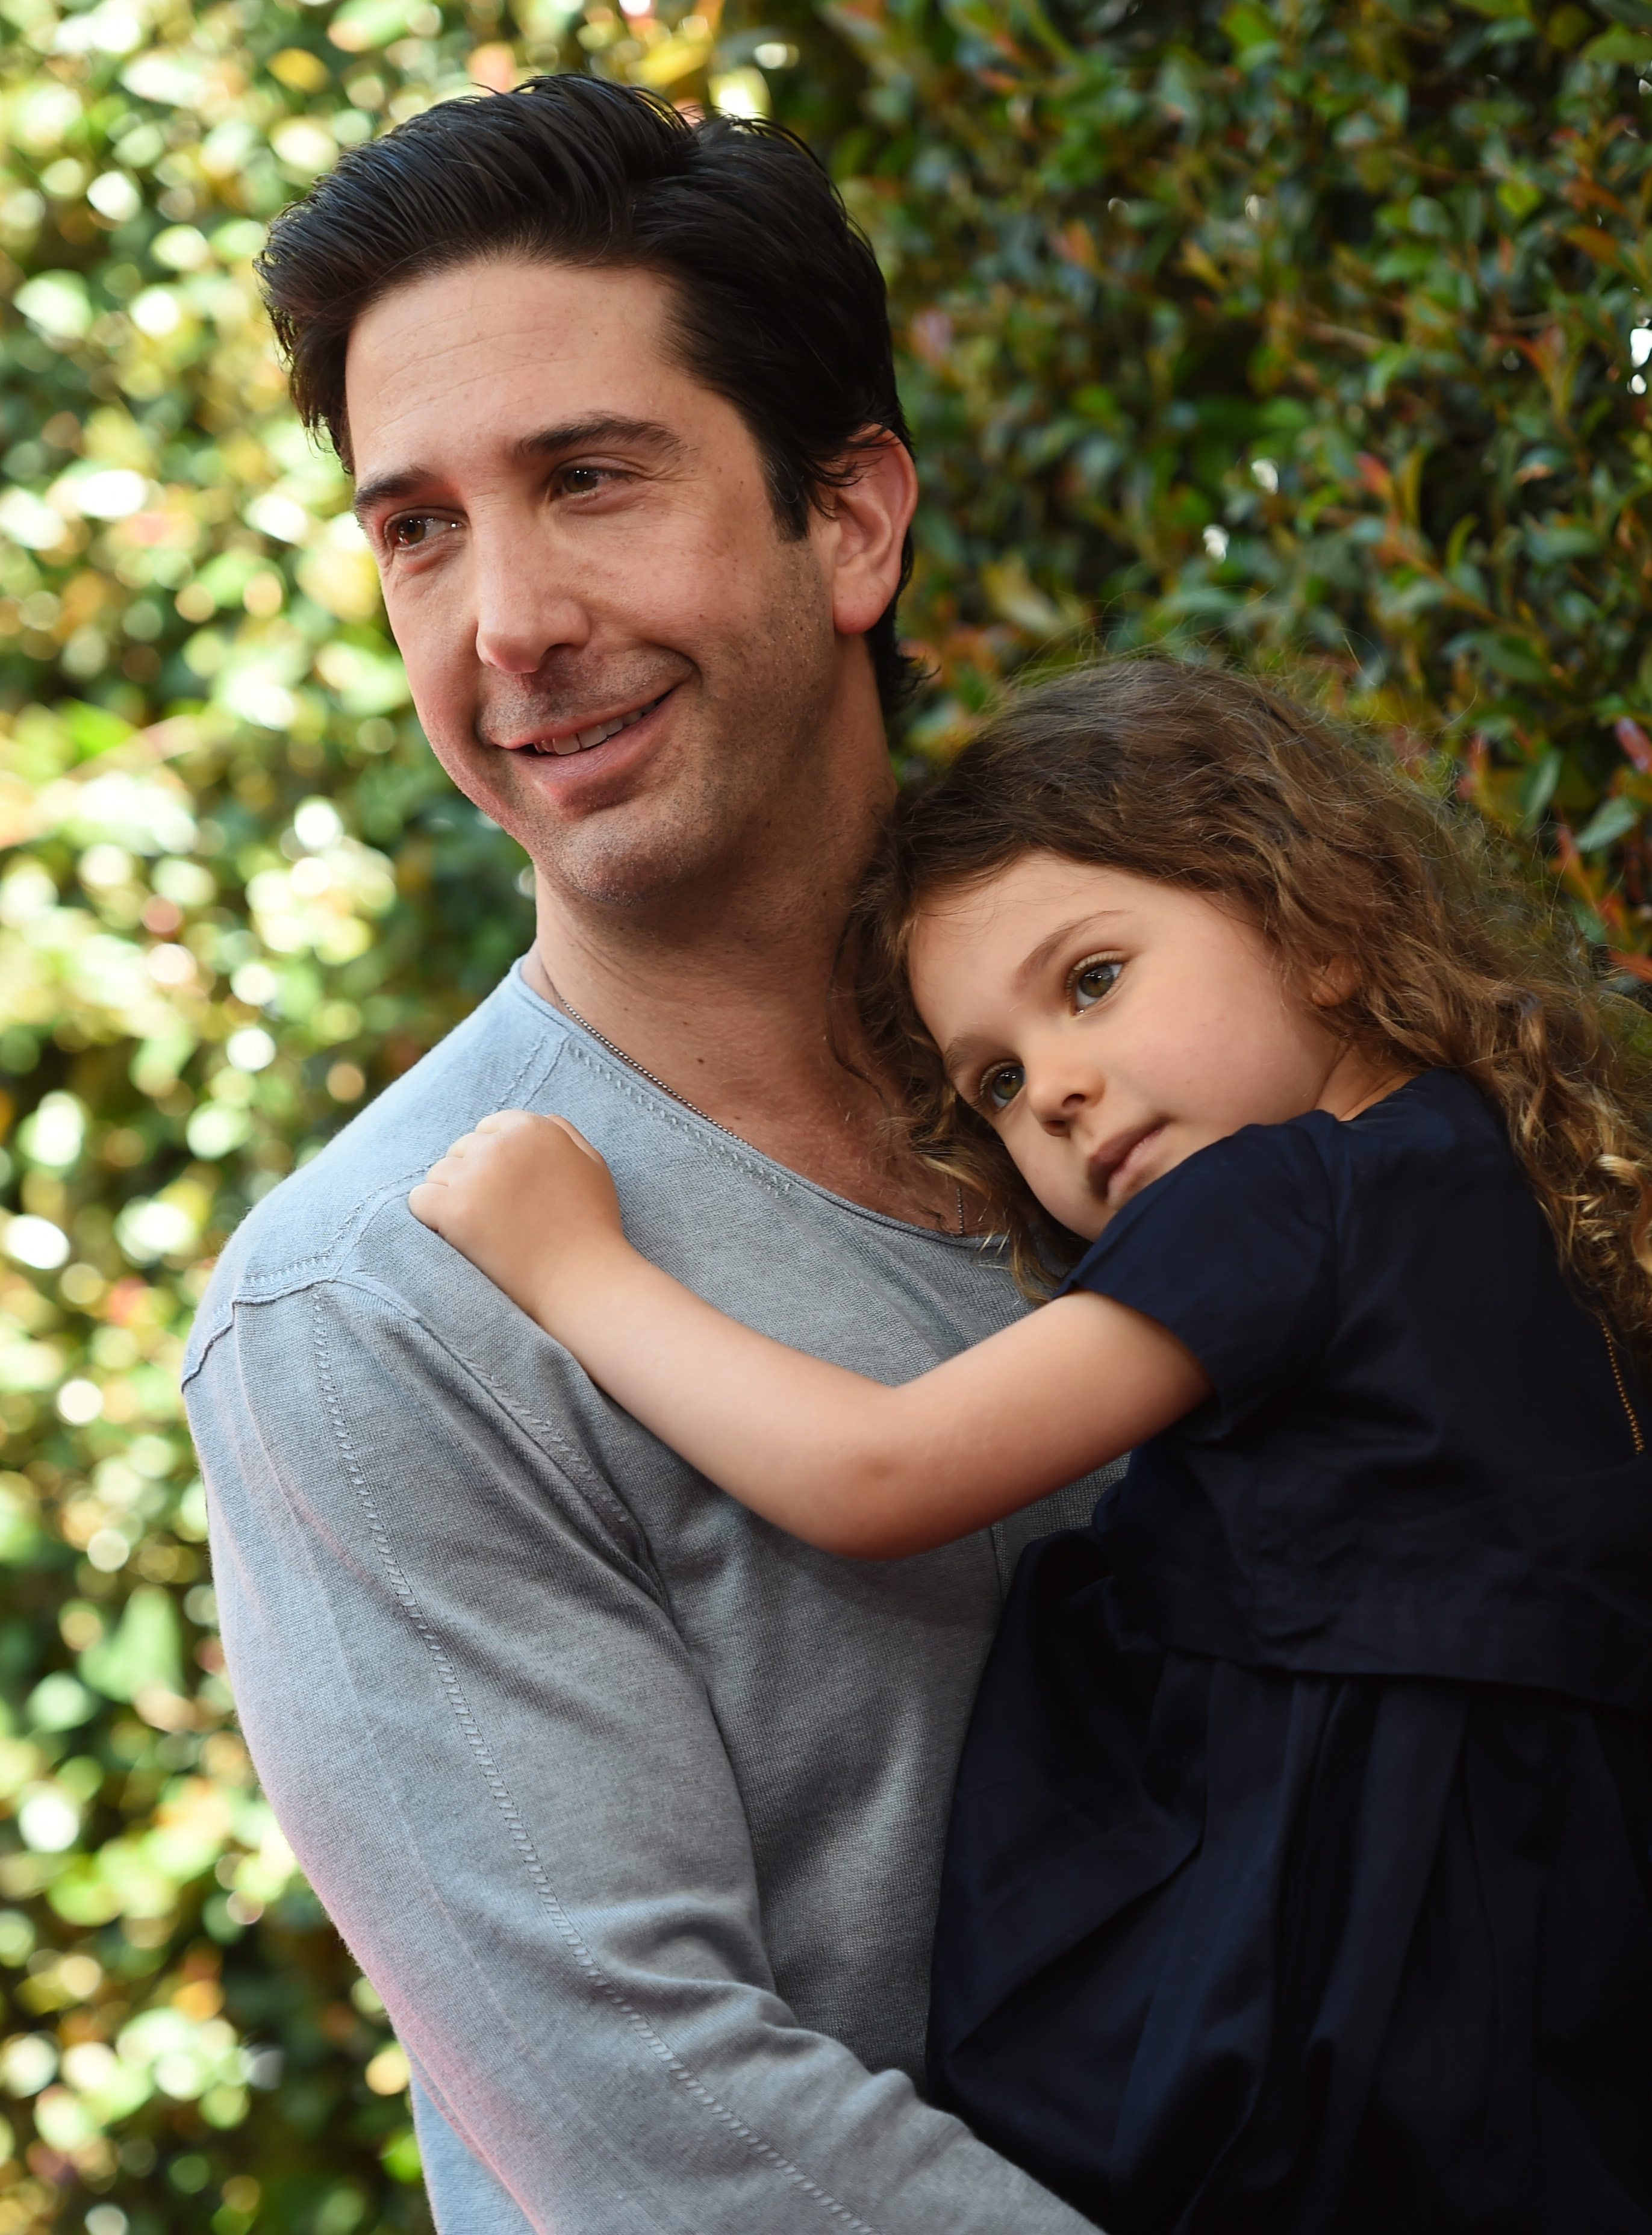 David Schwimmer and his daughter Cleo at the 12th Annual John Varvatos Stuart House Benefit in Los Angeles, California on April 26, 2015 | Source: Getty Images